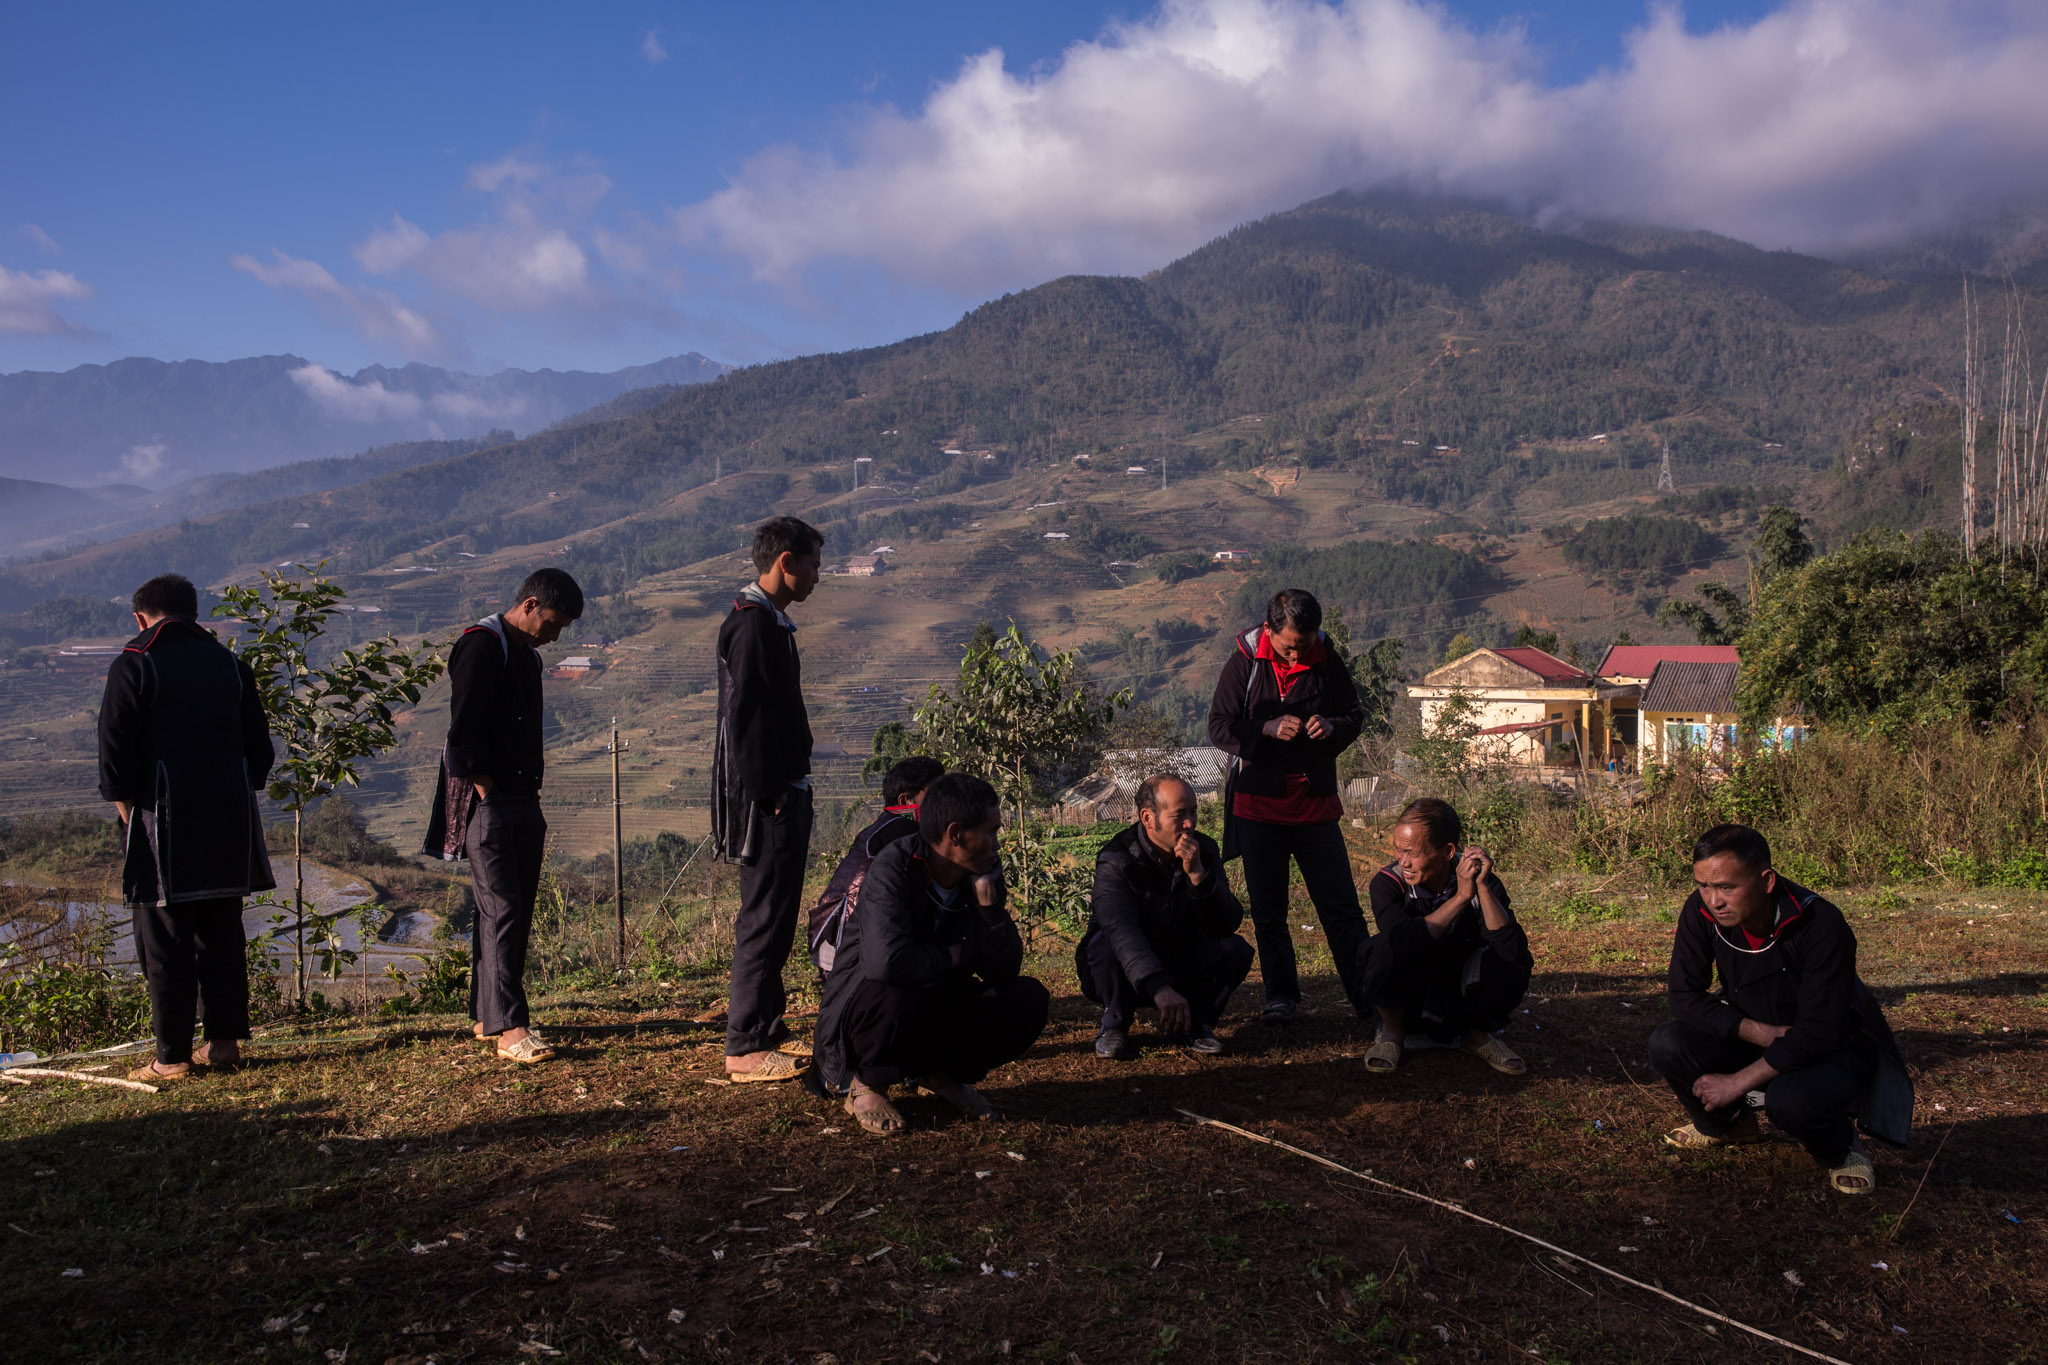 Men of the Hmong tribe meet in the early hours of the morning to begin the funeral rituals of one of the members of their community. Rituals around Hmong funerals are related to his deep belief in the reincarnation of the human soul.